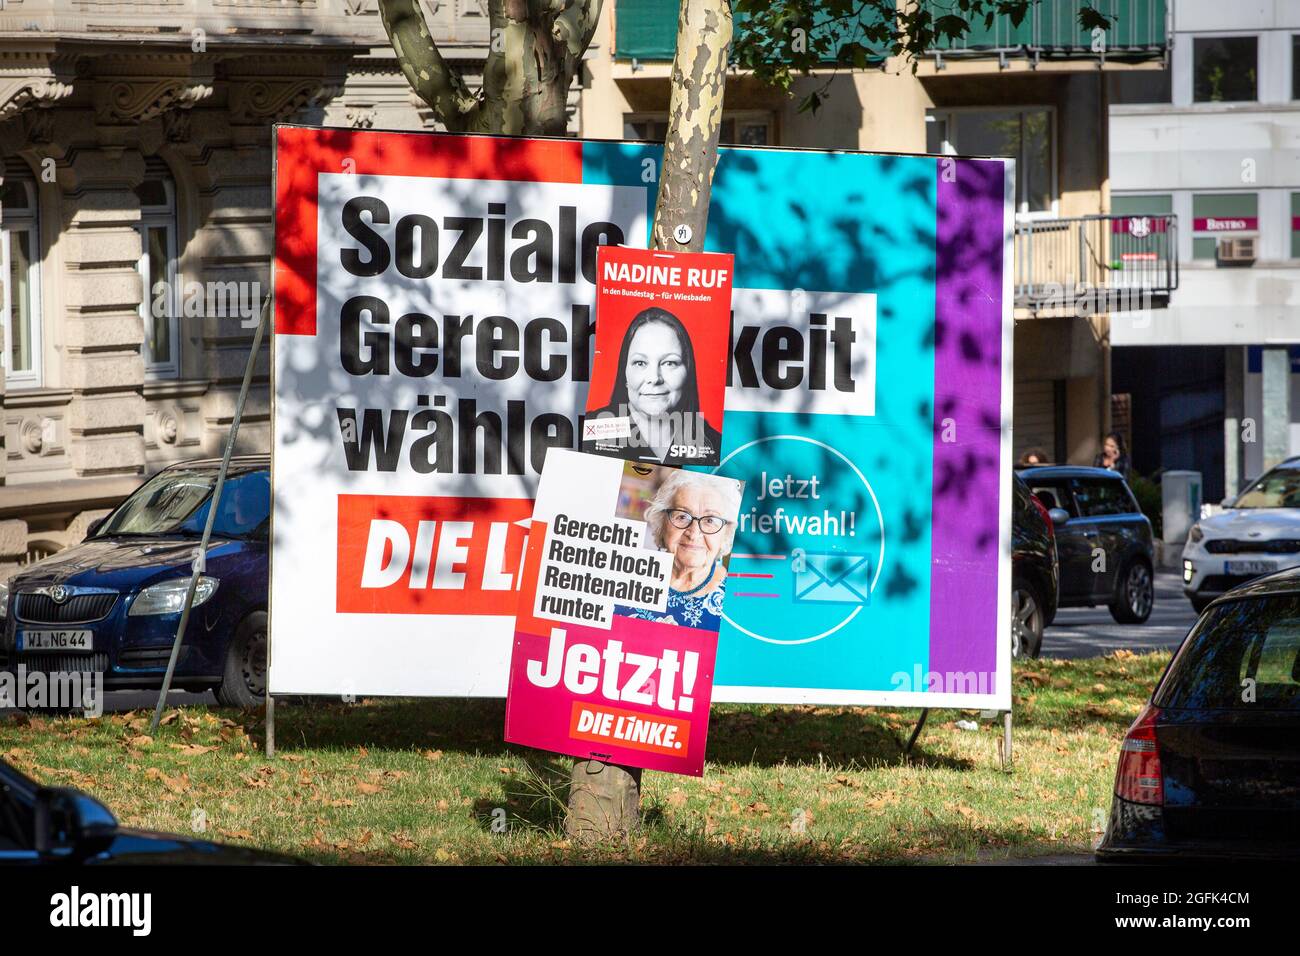 Wiesbaden, Germany - August 25, 2021: Election campaign billboards of the German party DIE LINKE (German Left party) and Social Democratic Party (SPD) in the city center of Wiesbaden, Hessen. Germany faces federal elections on September 26. Some road users in the background Stock Photo